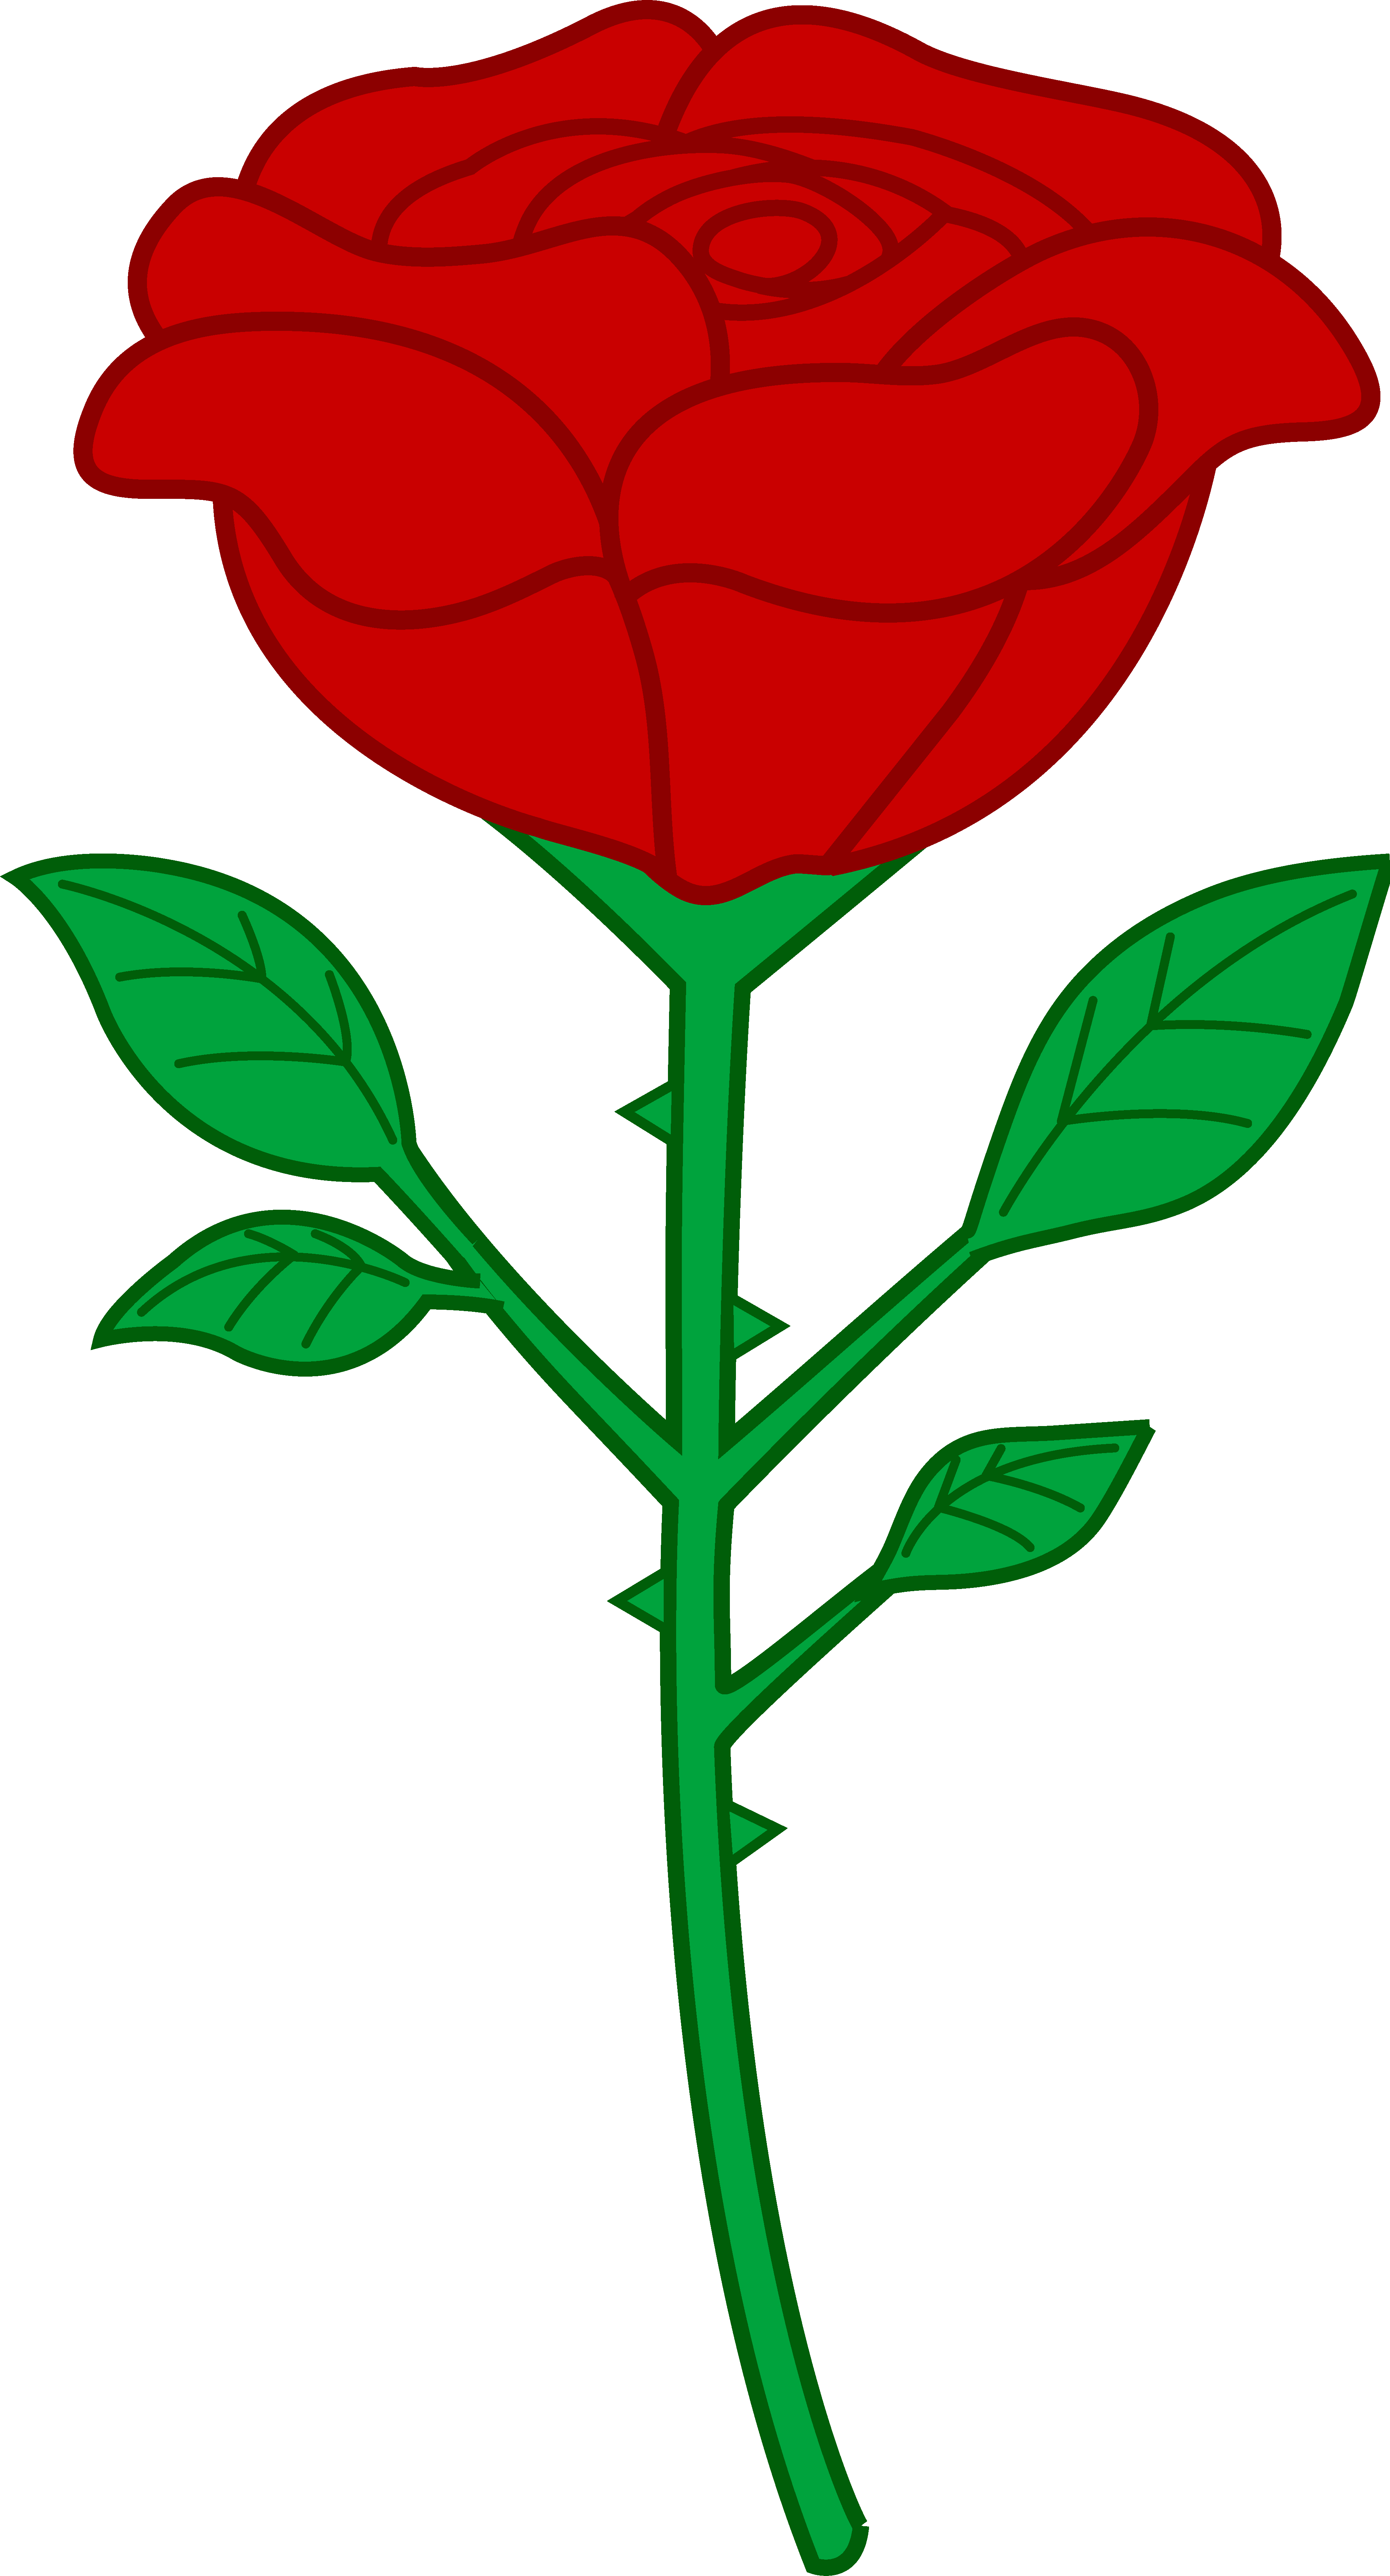 clipart rose - Clipart Of Roses